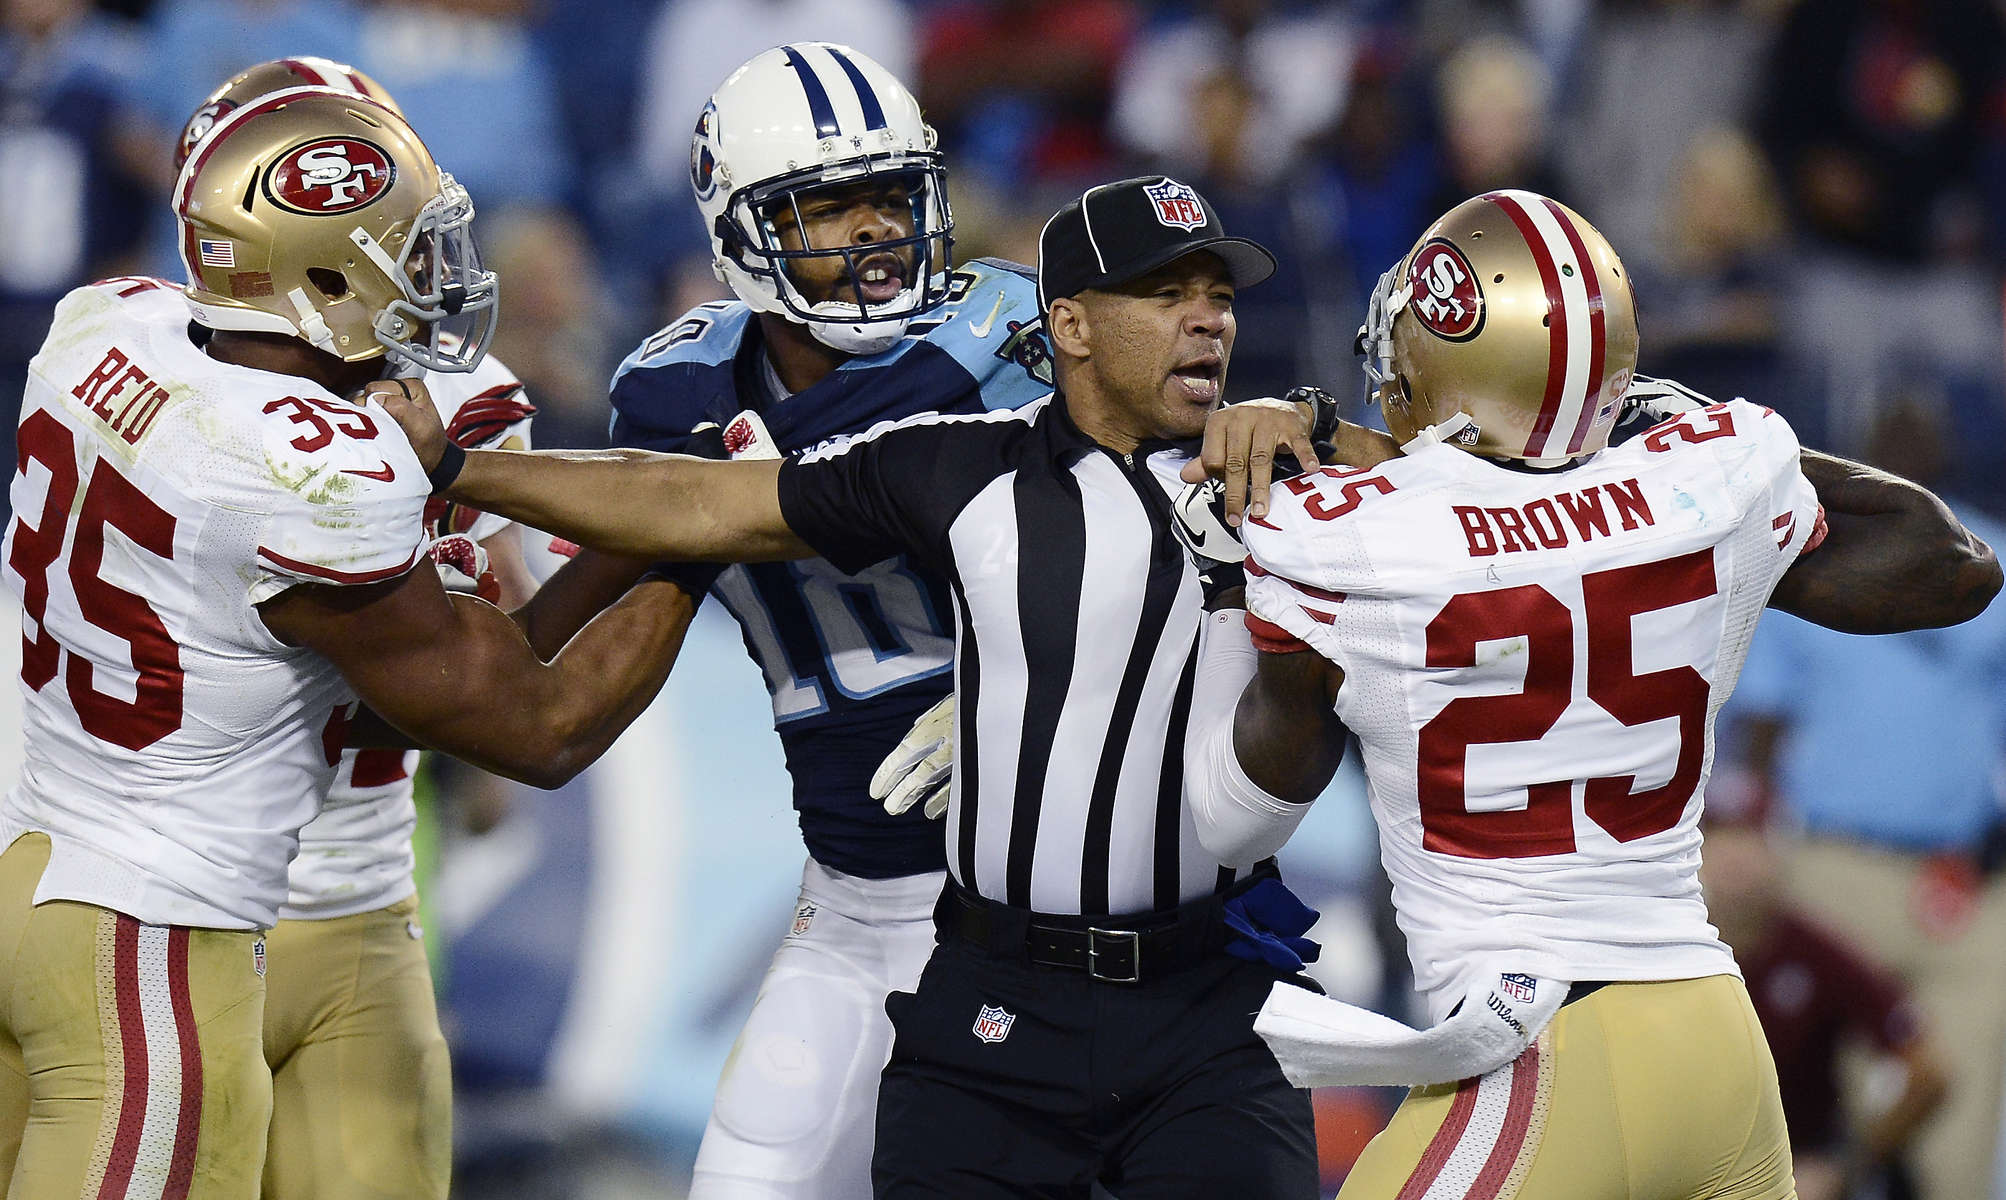 Back judge Greg Steed tries to separate San Francisco 49ers cornerback Tarell Brown and Tennessee Titans wide receiver Kenny Britt during a scuffle in the fourth quarter of an NFL football game on Oct. 20, 2013, in Nashville, Tenn. At left is 49ers Eric Reid.(AP Photo/ Mark Zaleski)